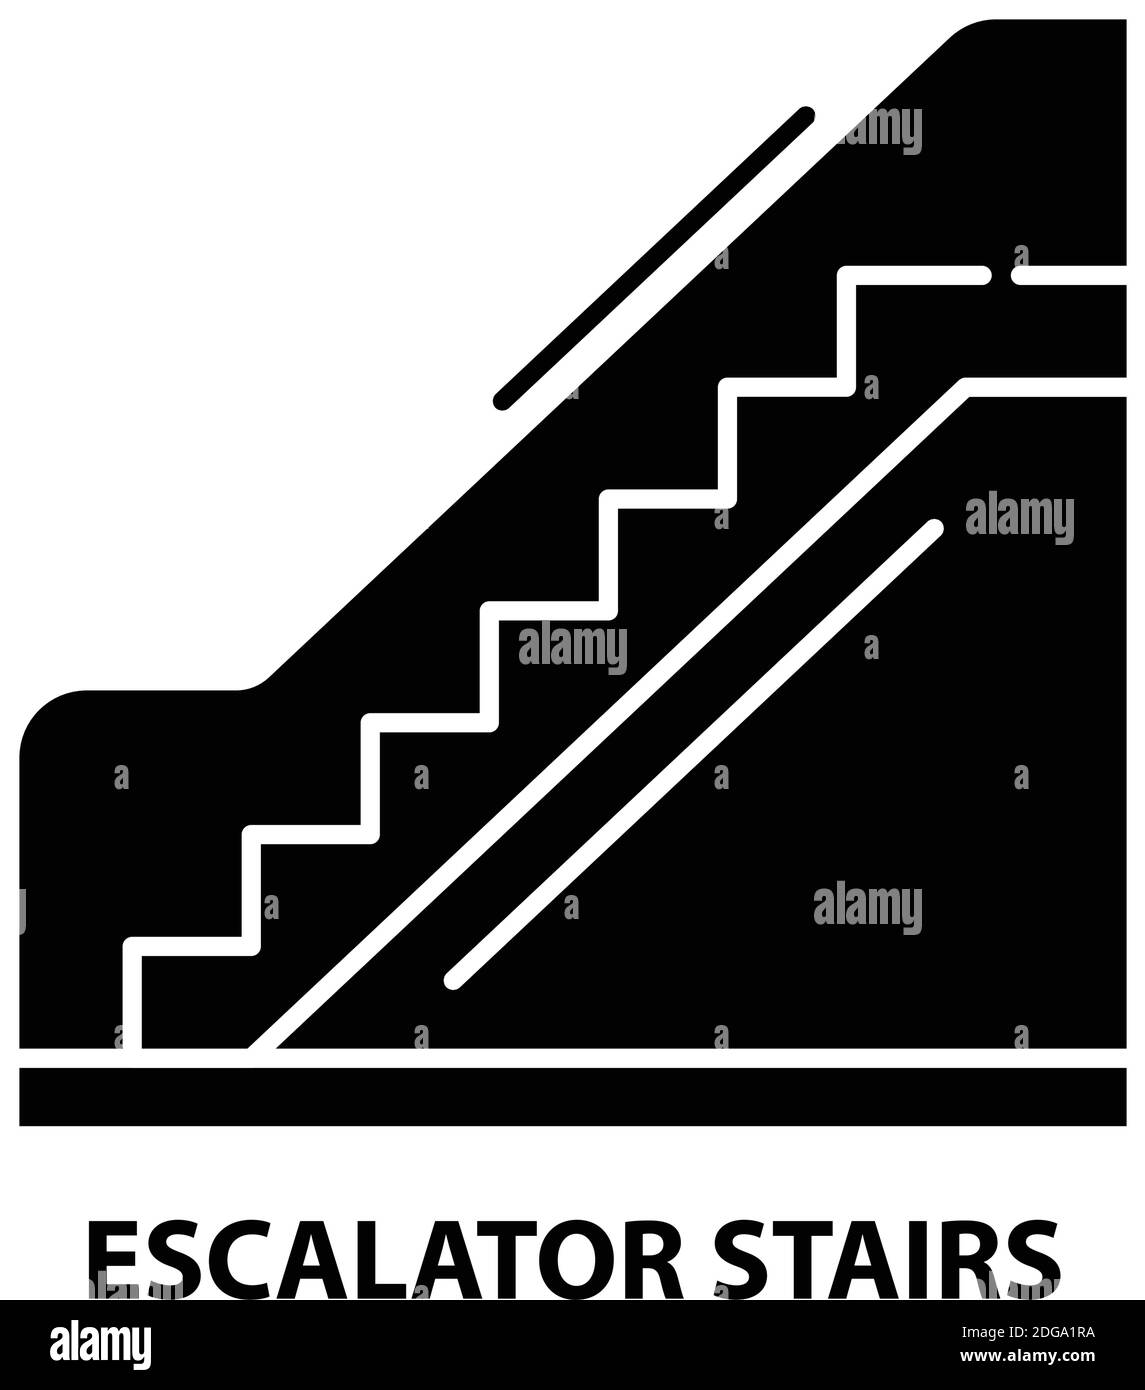 escalator stairs icon, black vector sign with editable strokes, concept illustration Stock Vector